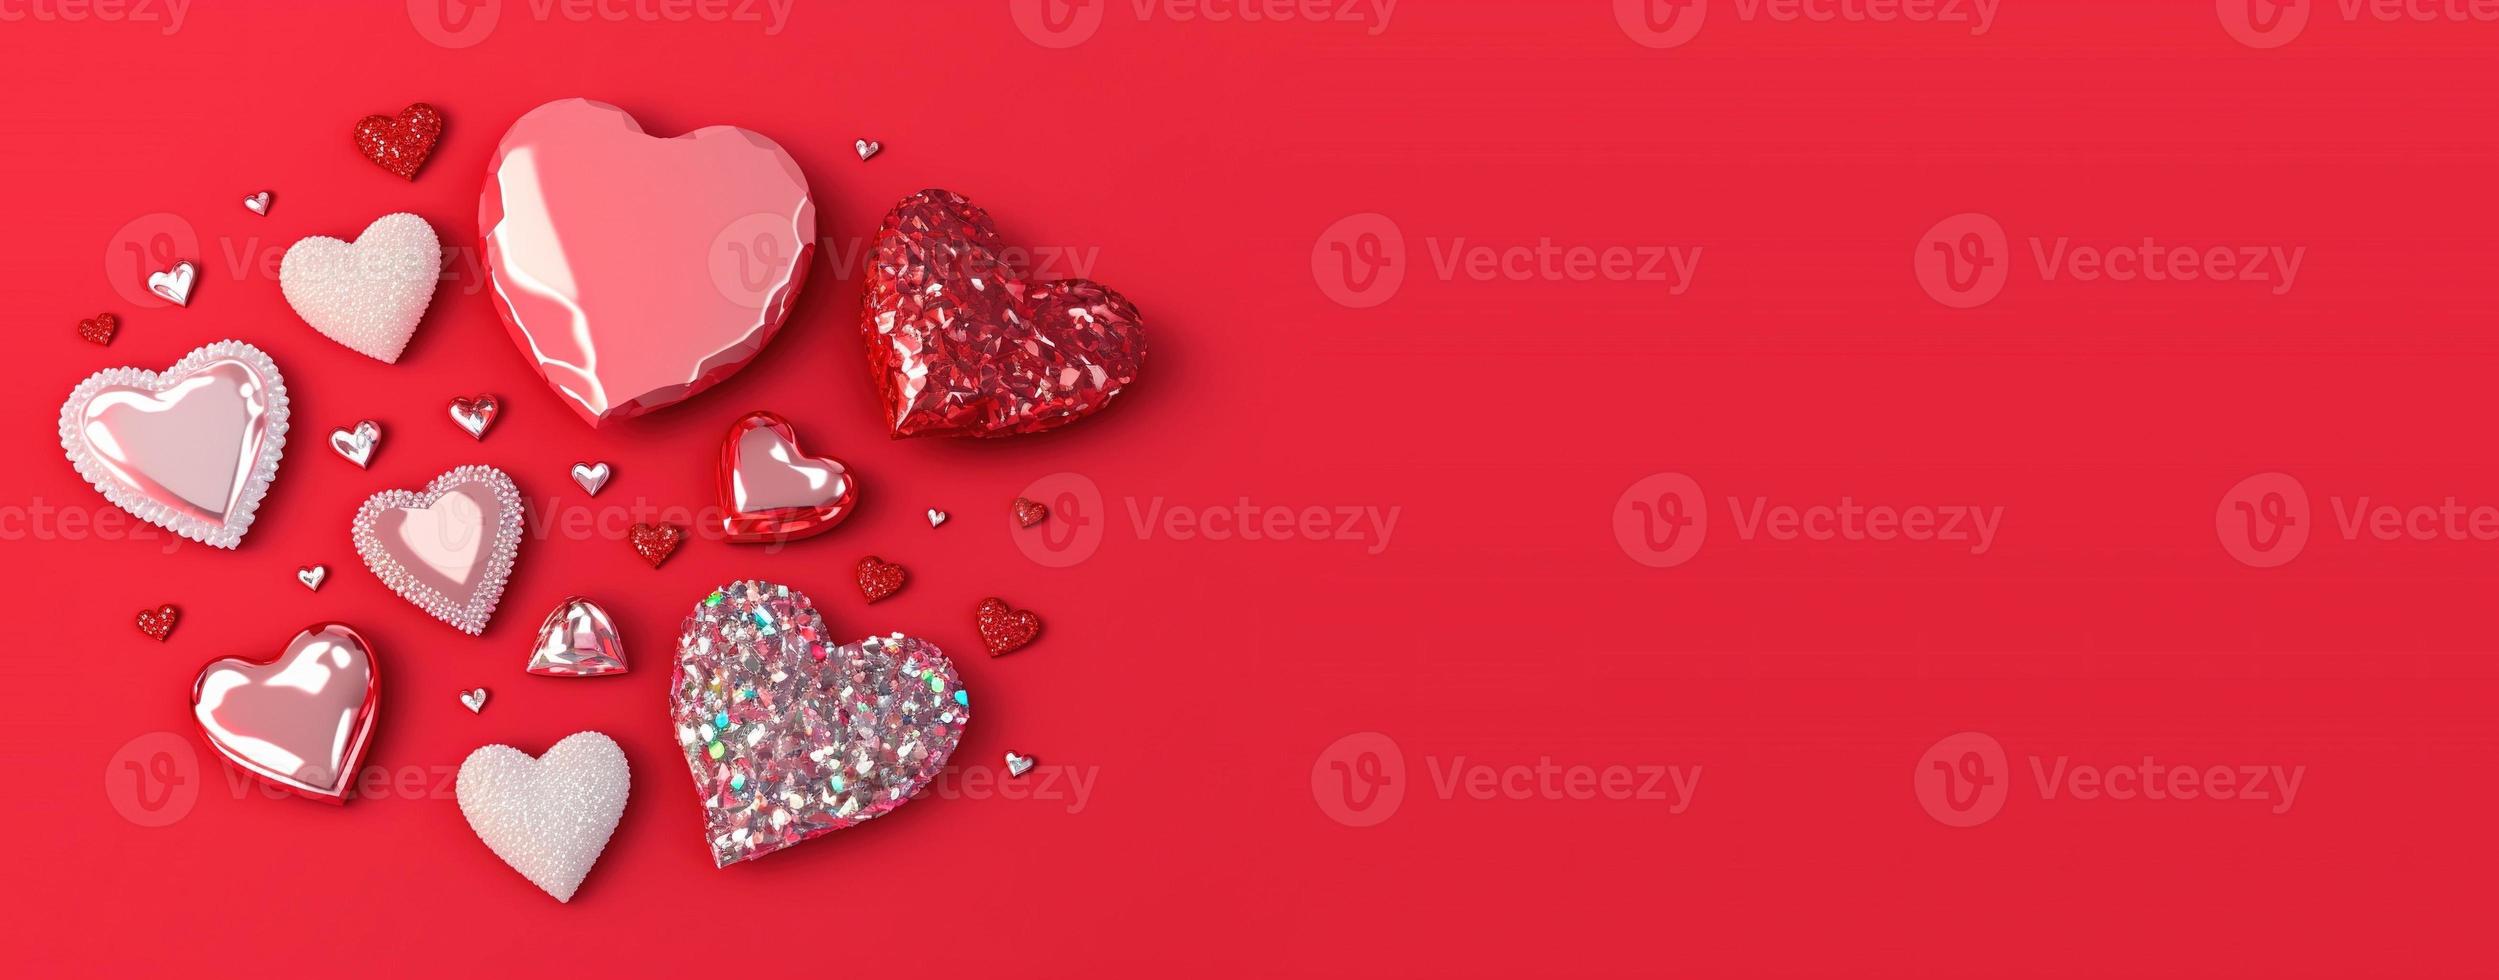 Valentine's Day Crystal Diamond and 3D Heart Illustration Banner photo